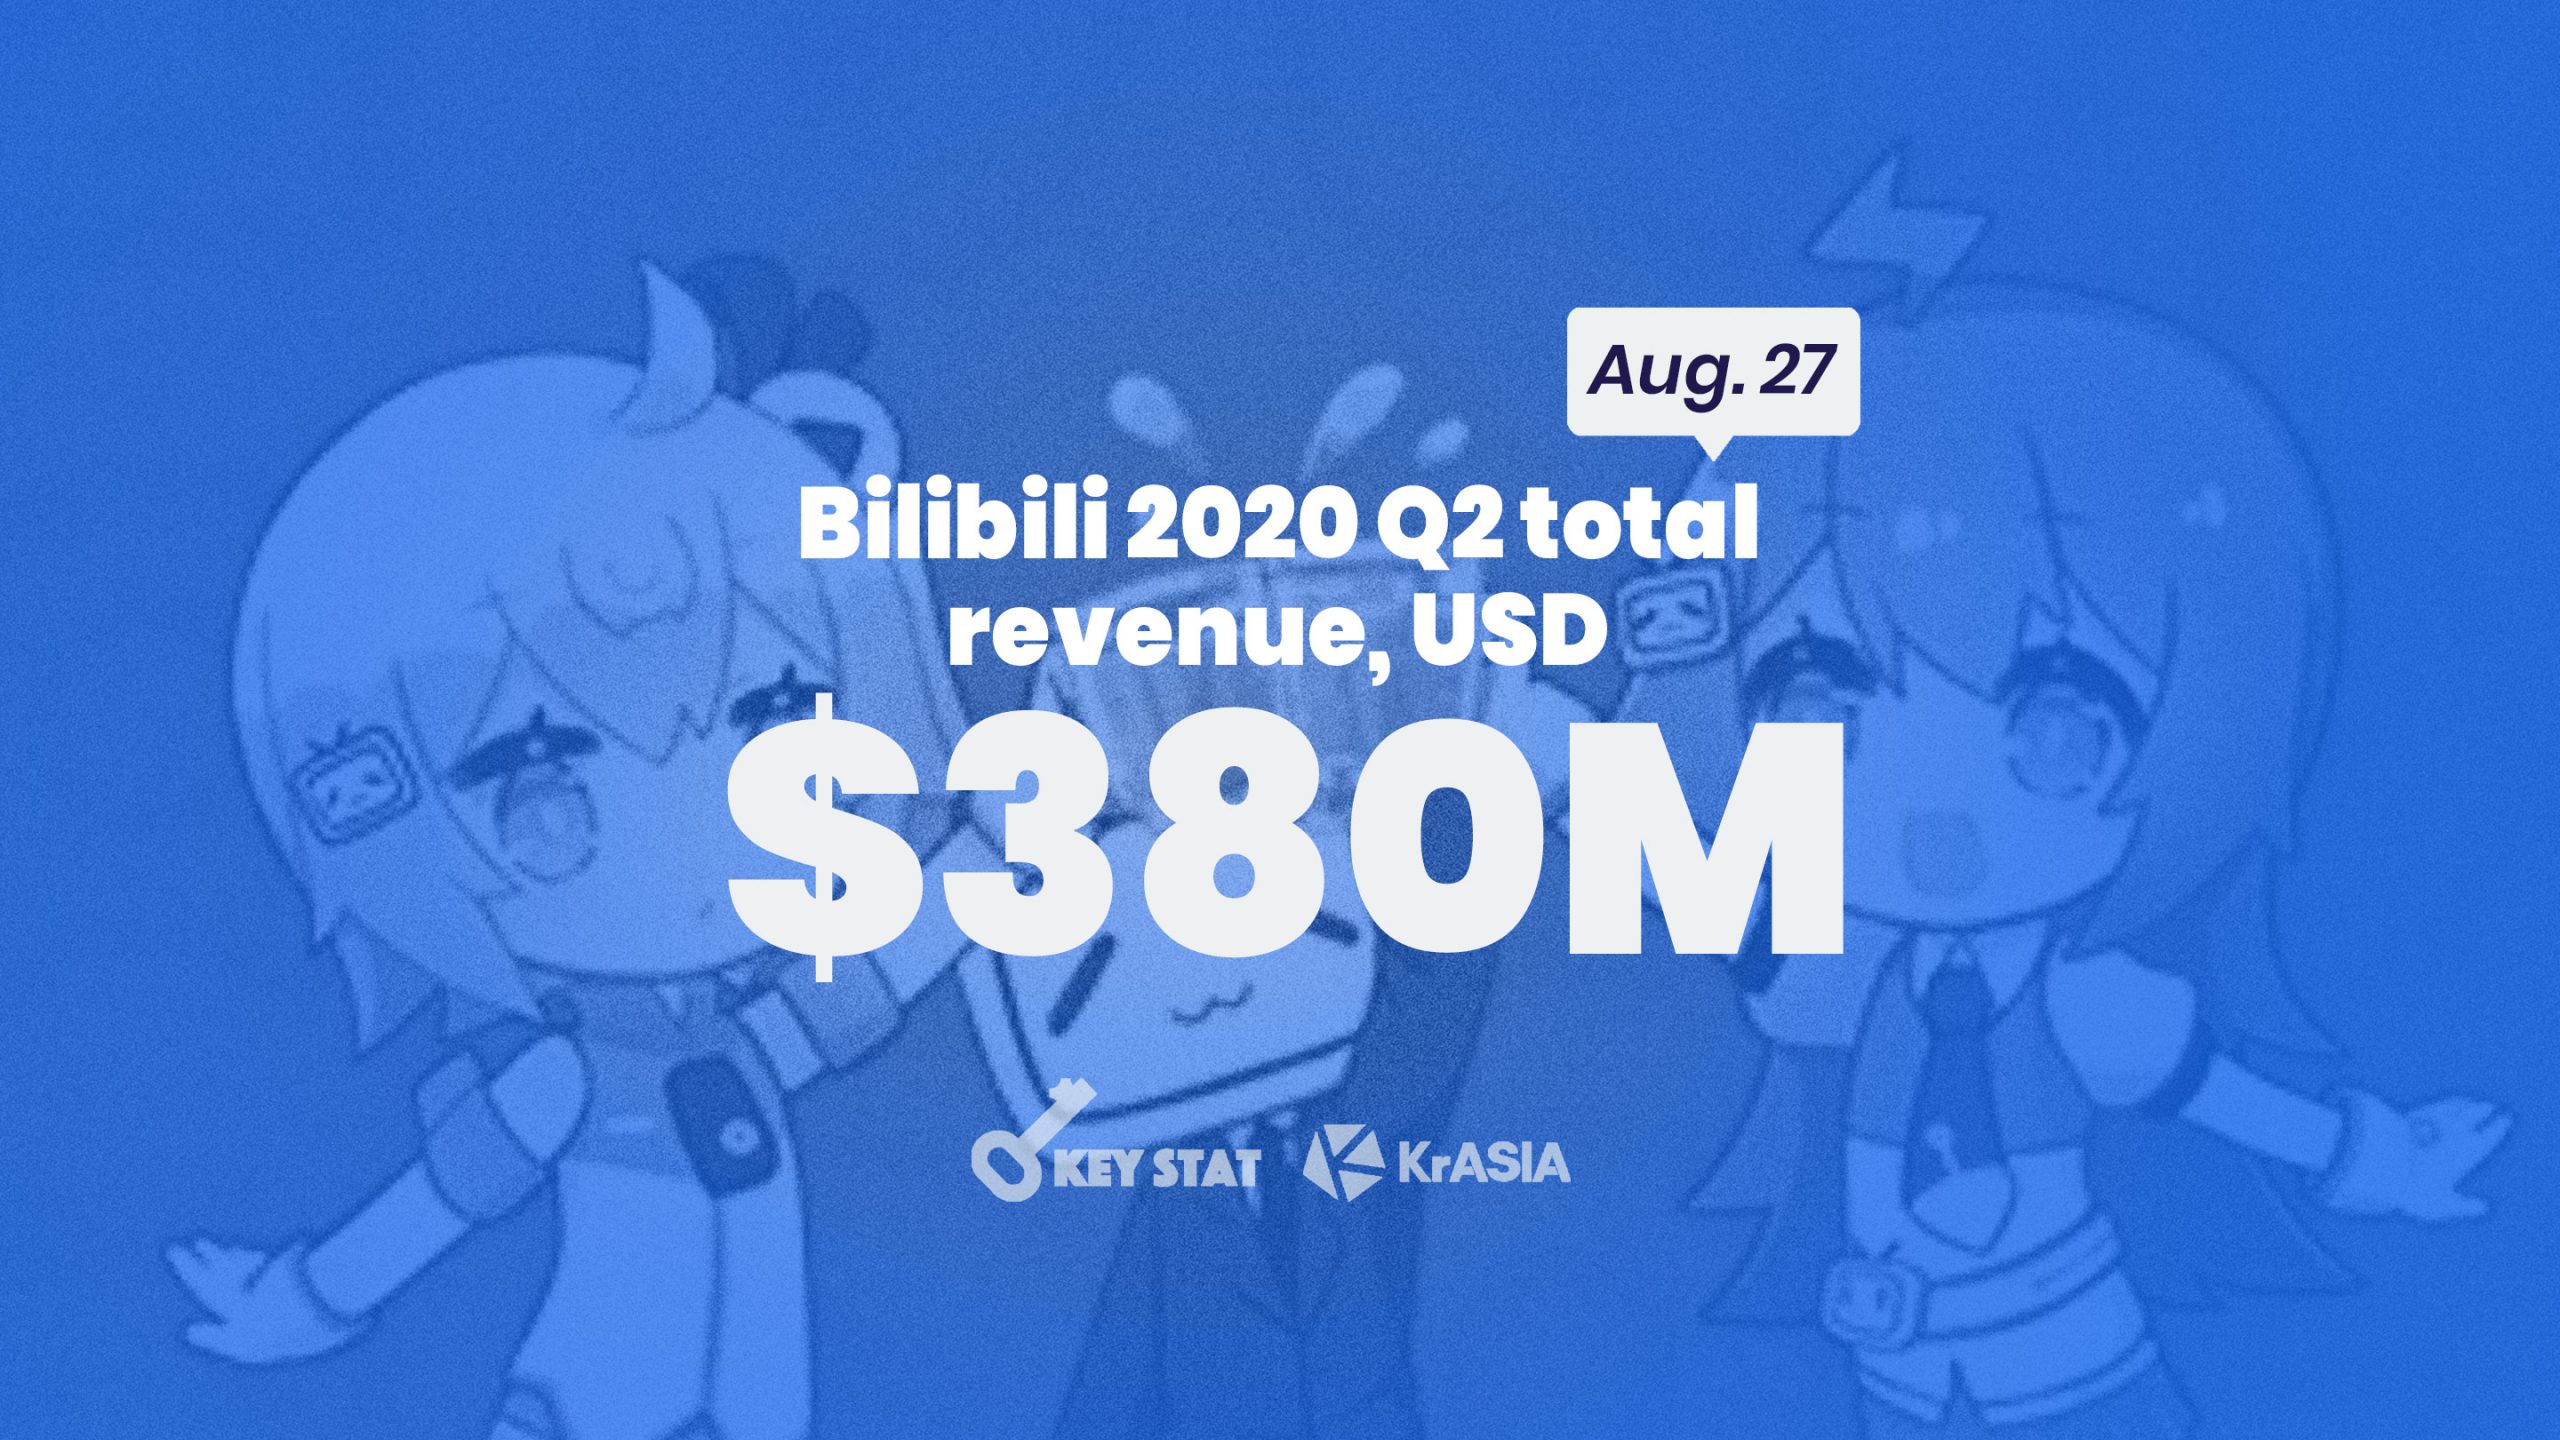 KEY STAT | Bilibili reports better-than-expected Q2 2020 earnings